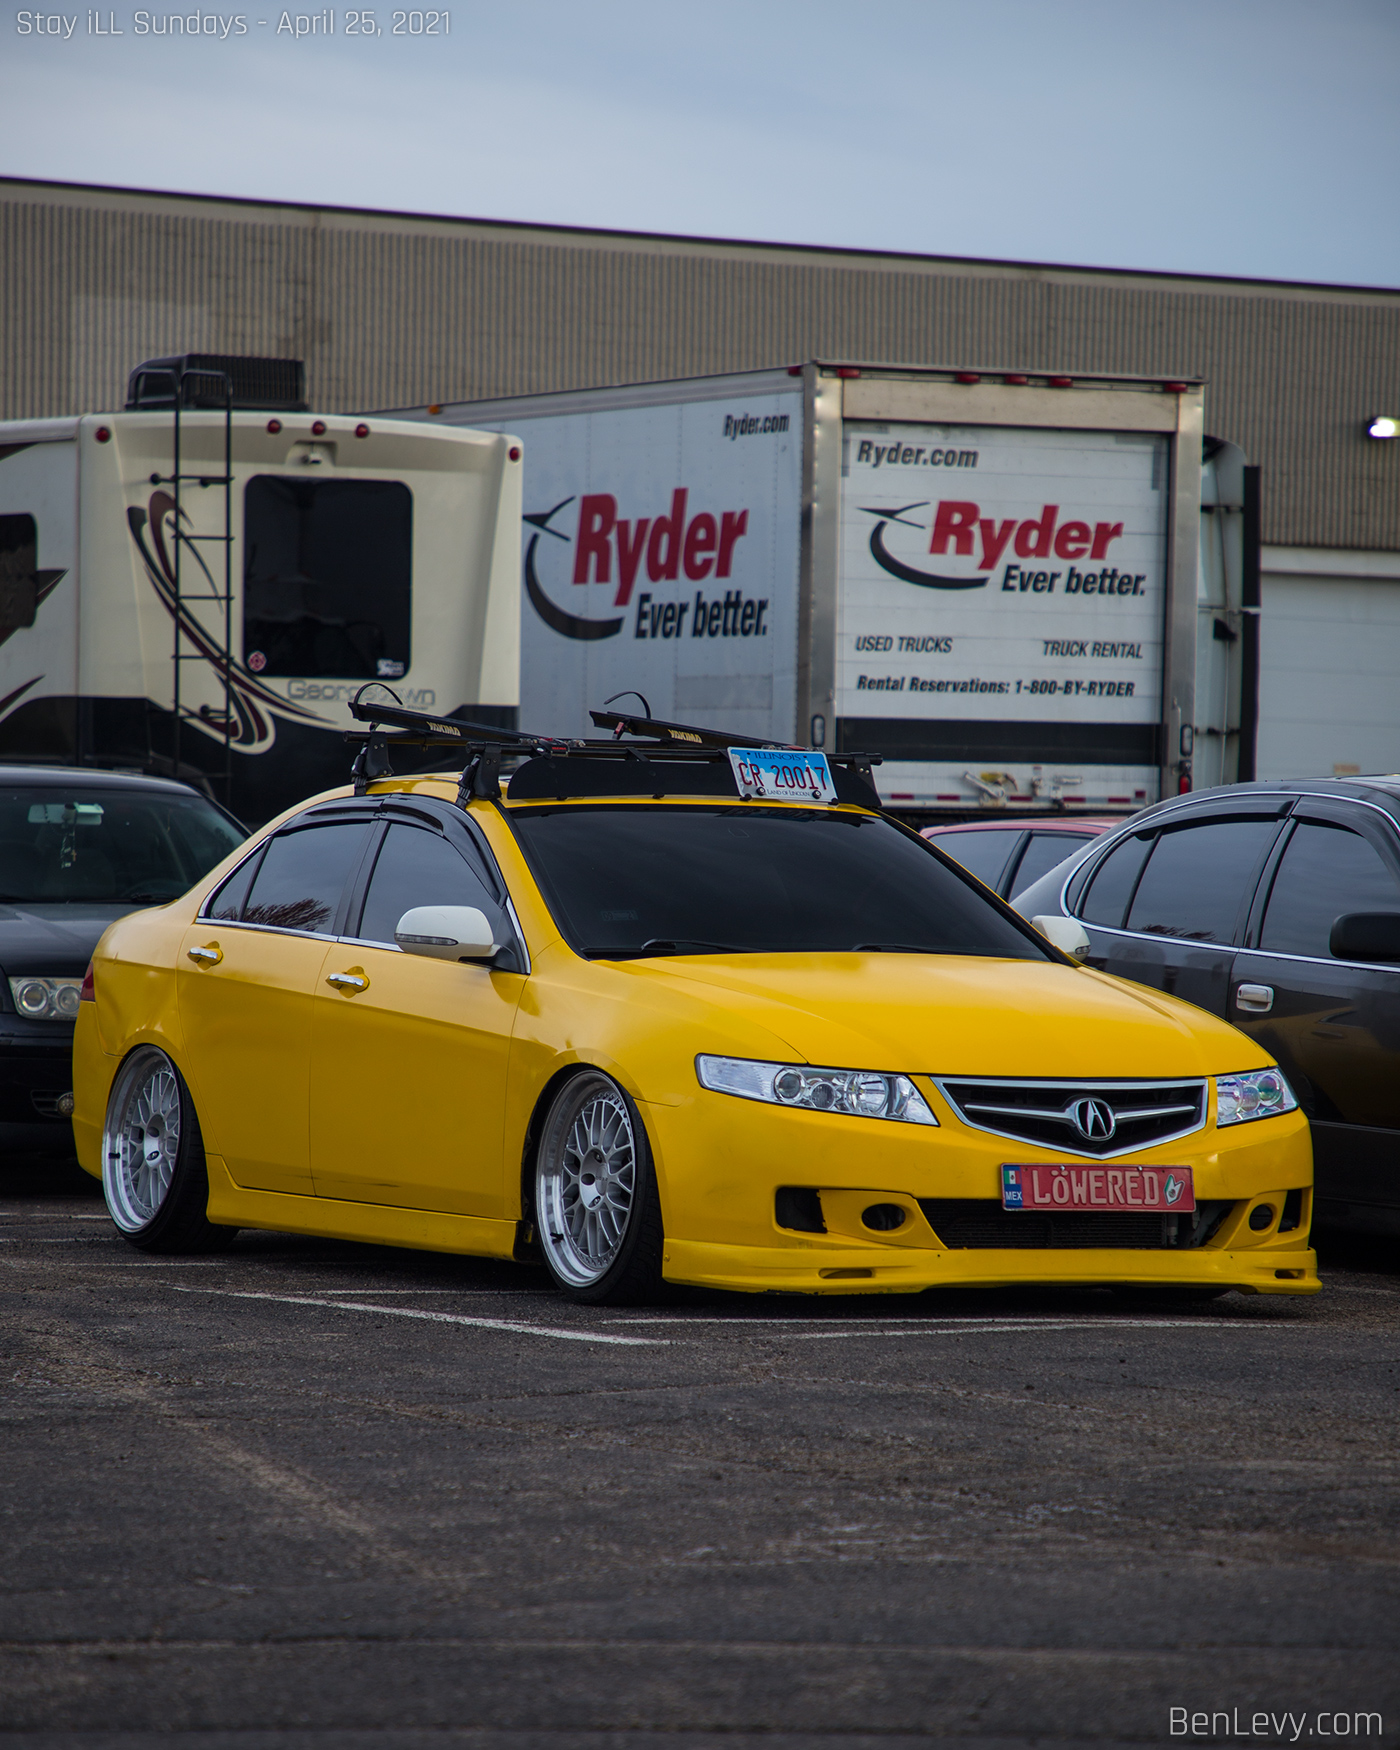 Rattle-canned Acura TSX